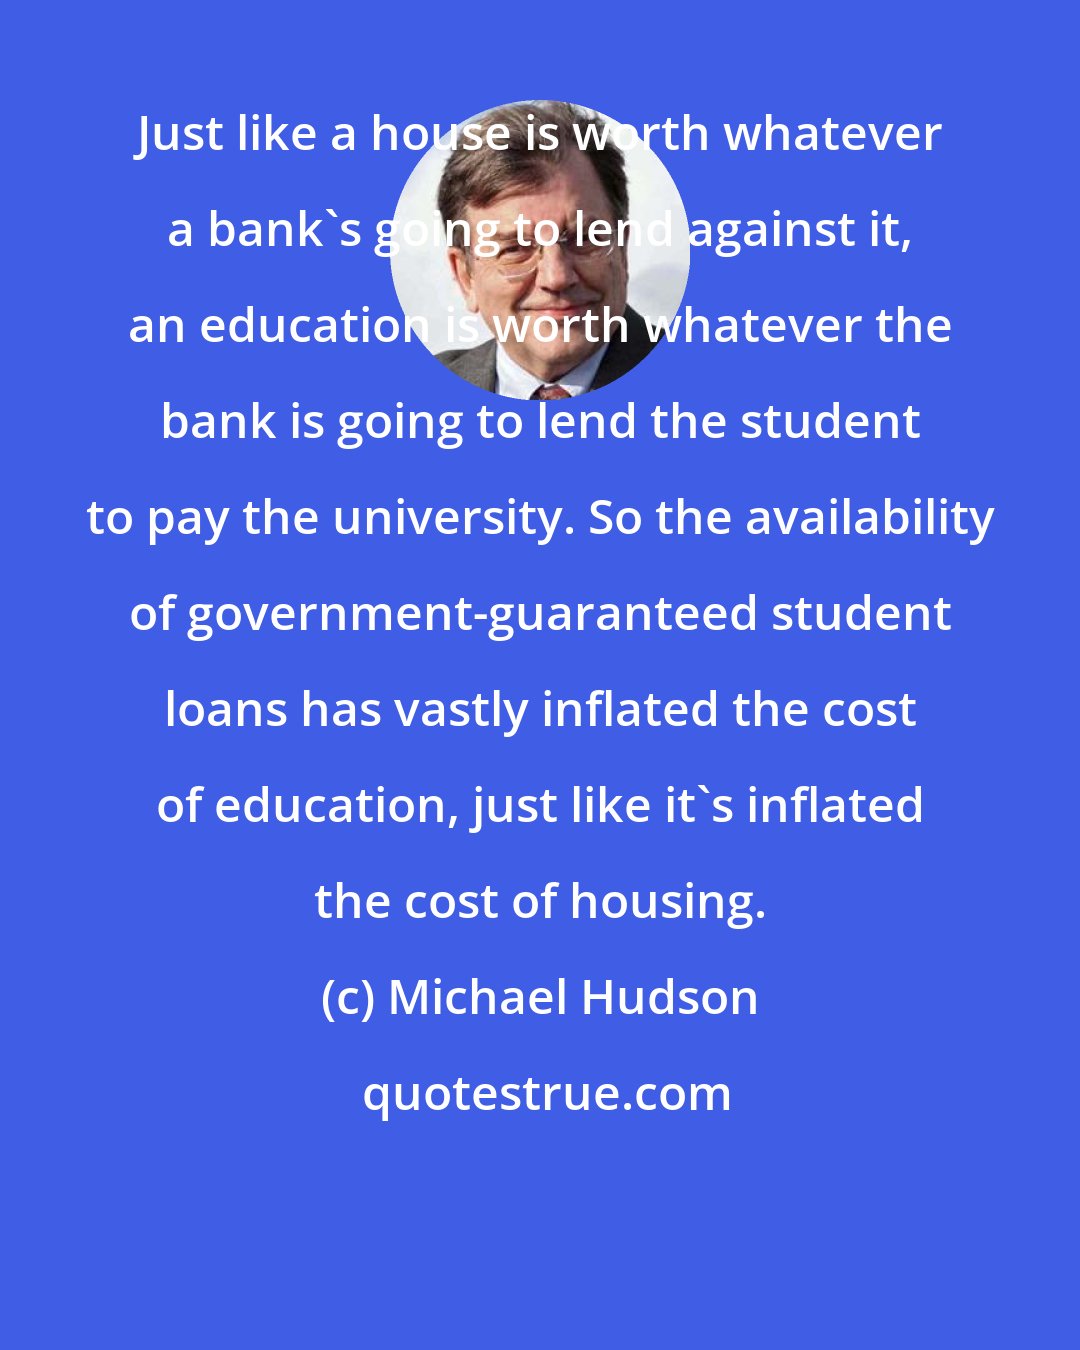 Michael Hudson: Just like a house is worth whatever a bank's going to lend against it, an education is worth whatever the bank is going to lend the student to pay the university. So the availability of government-guaranteed student loans has vastly inflated the cost of education, just like it's inflated the cost of housing.